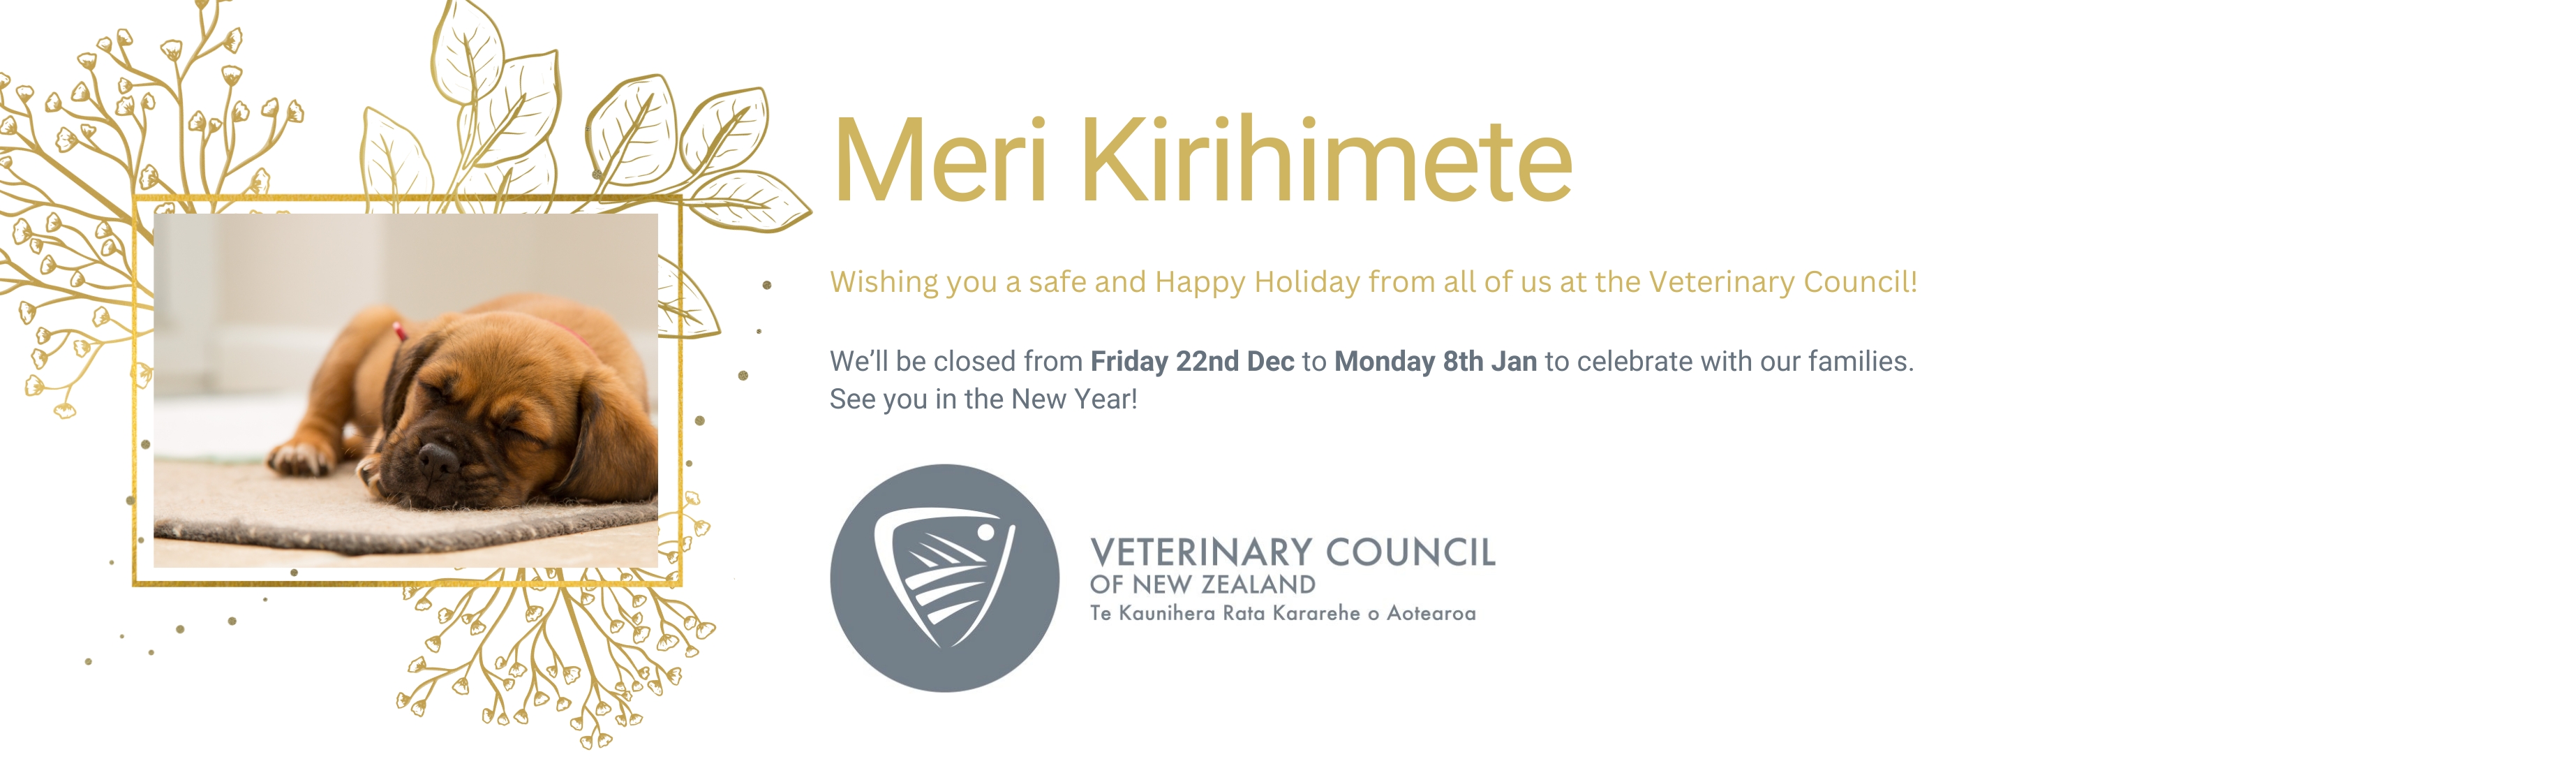 Meri Kirihimete, wishing you a safe and happy holidays from all of us at the Vet Council. We'll be closed from Friday 22 December to Monday 8 January to celebrate with our families.